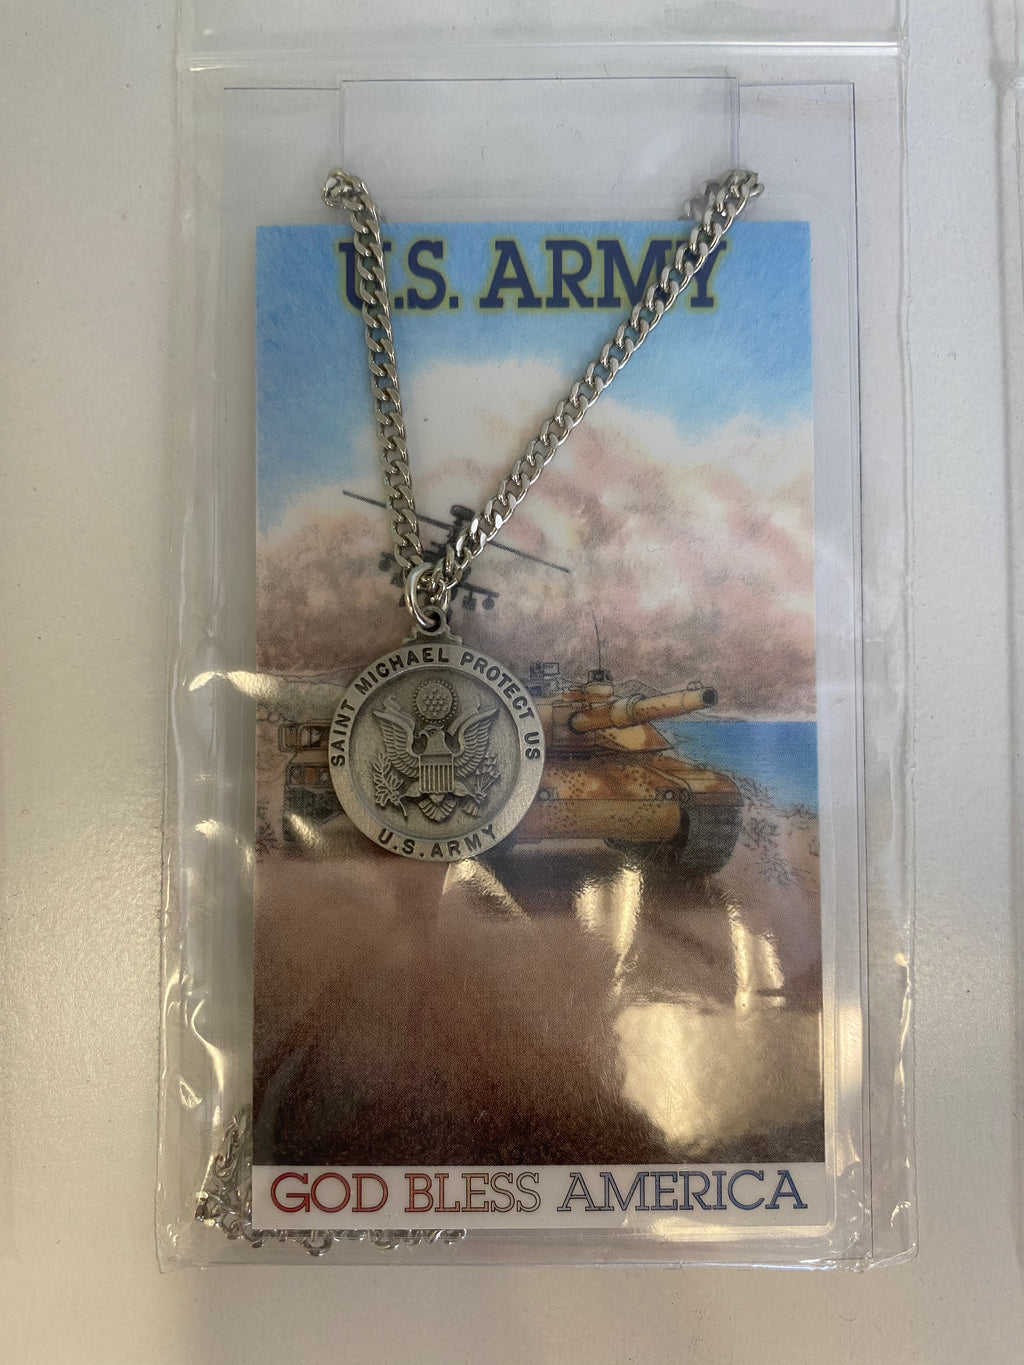 US army medal with prayer card